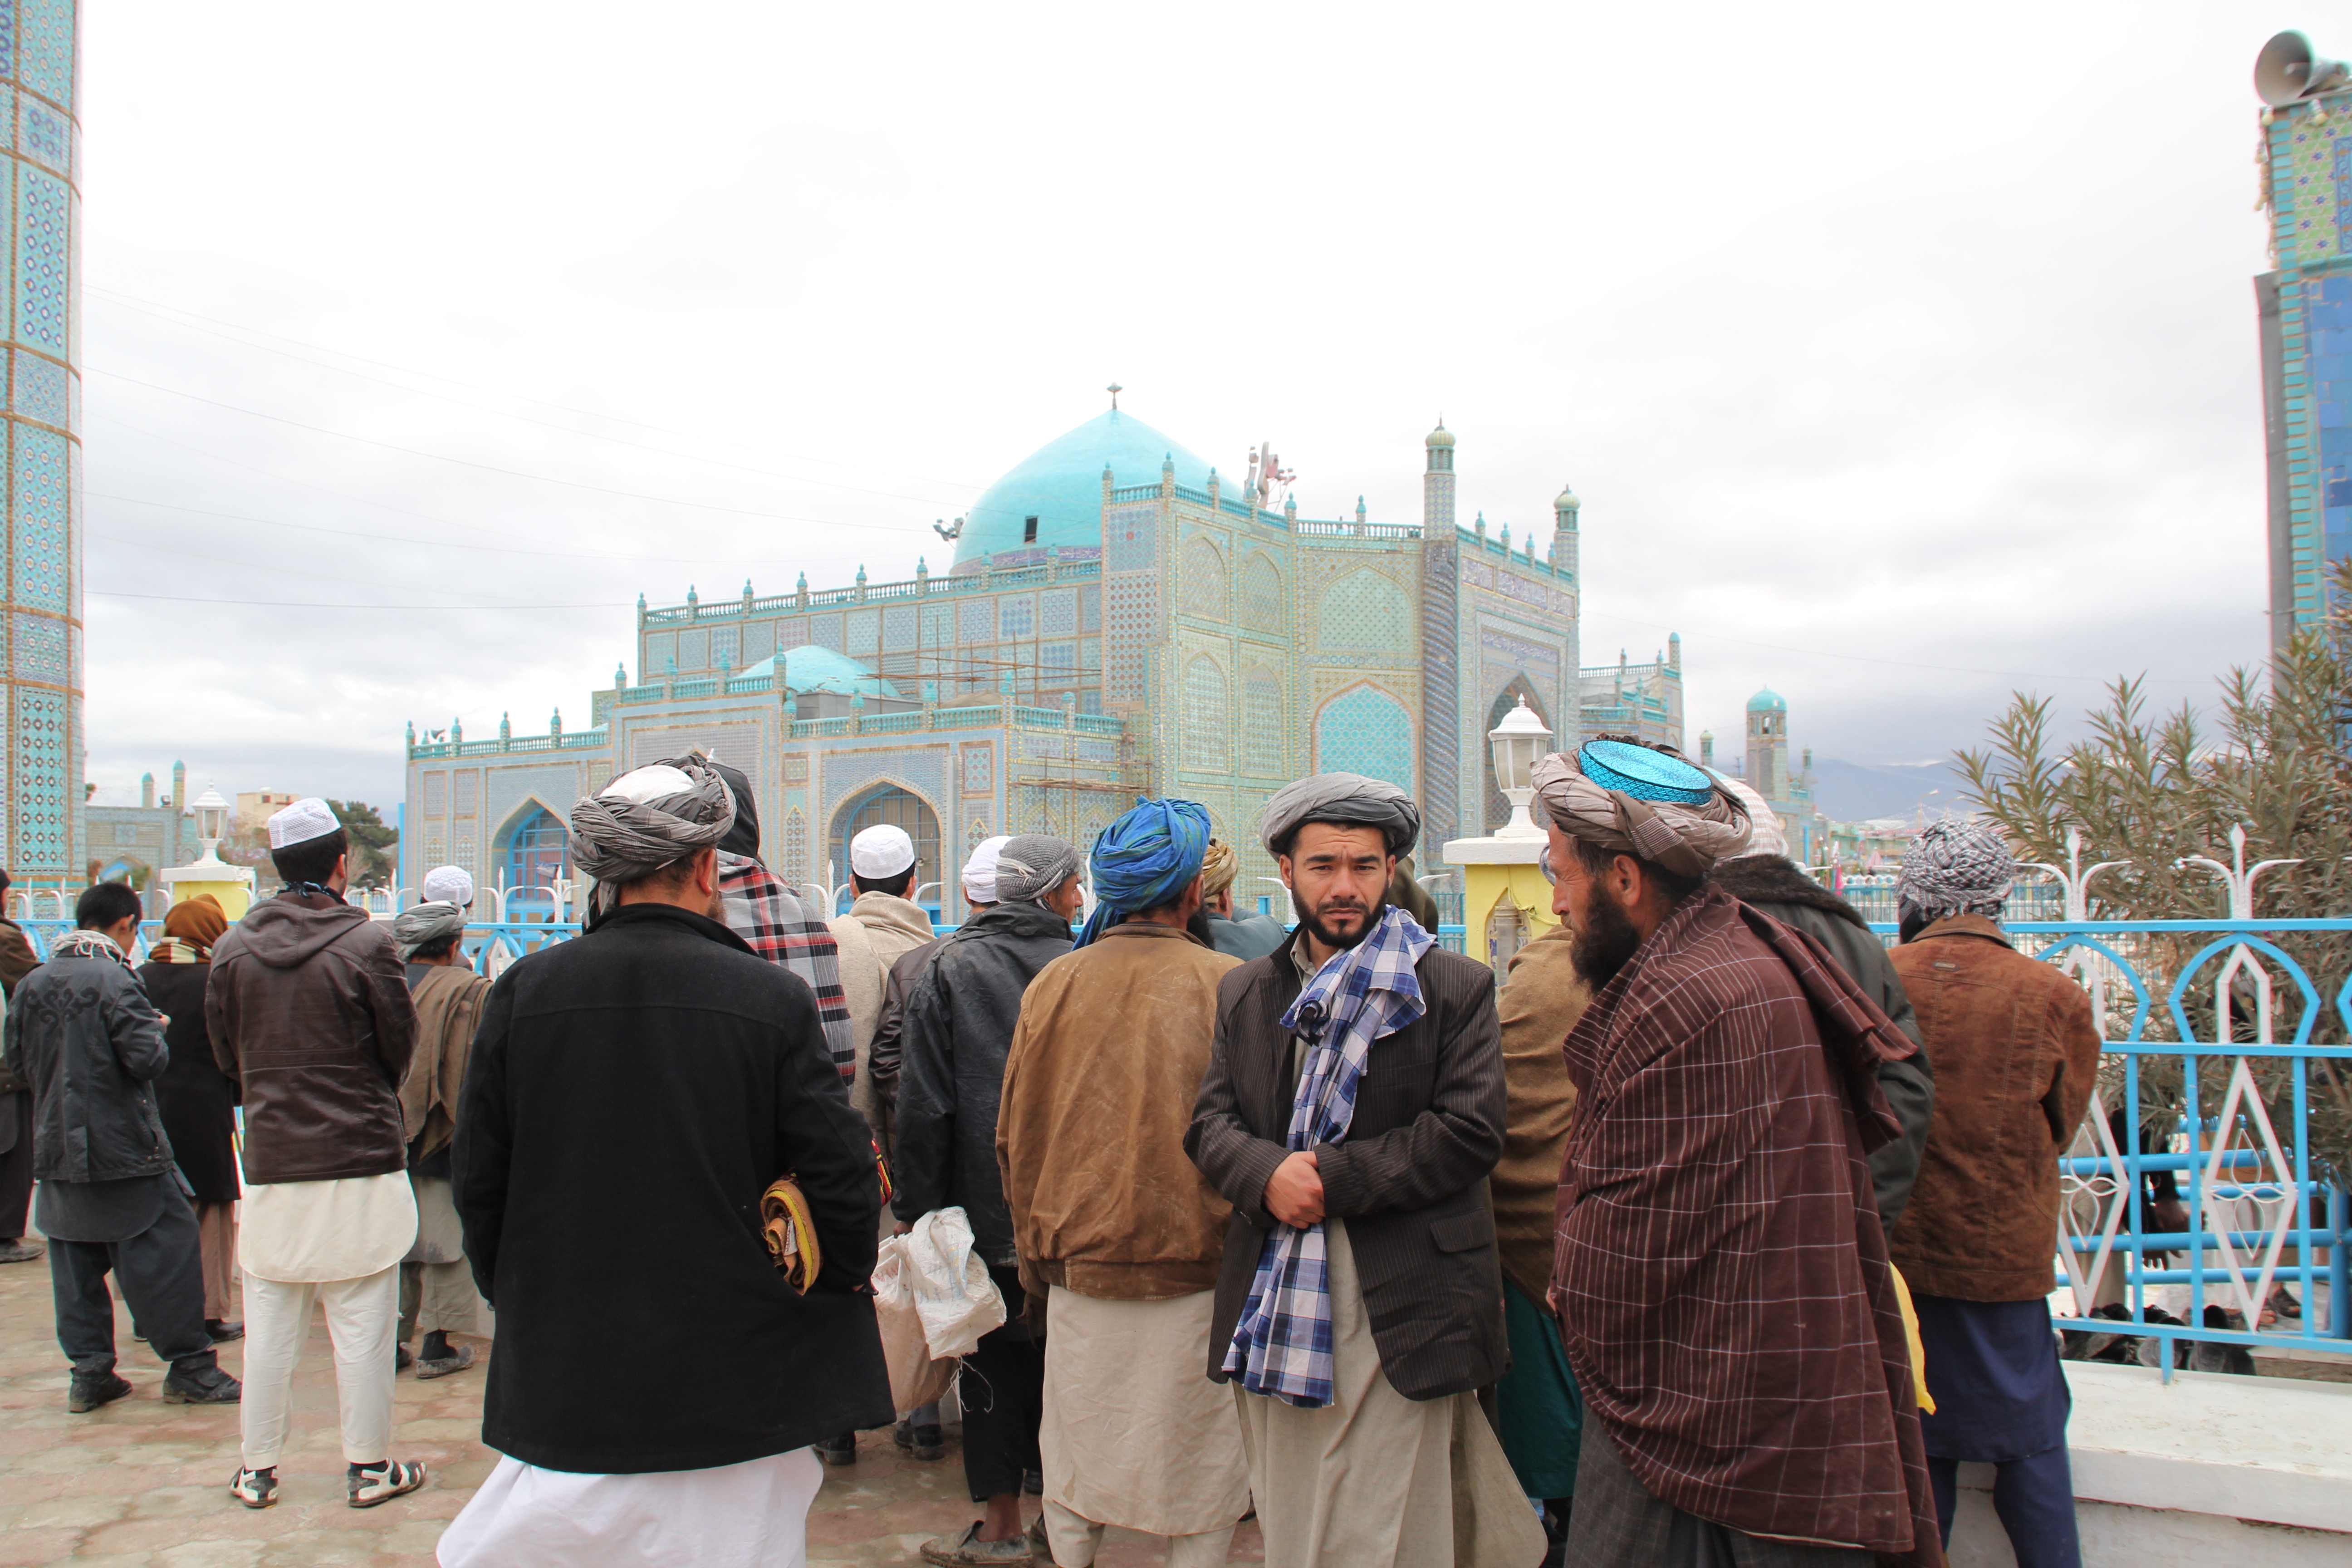 Muslims in front of the Blue Mosque in Mazar-i-Sharif (photo: Marian Brehmer)